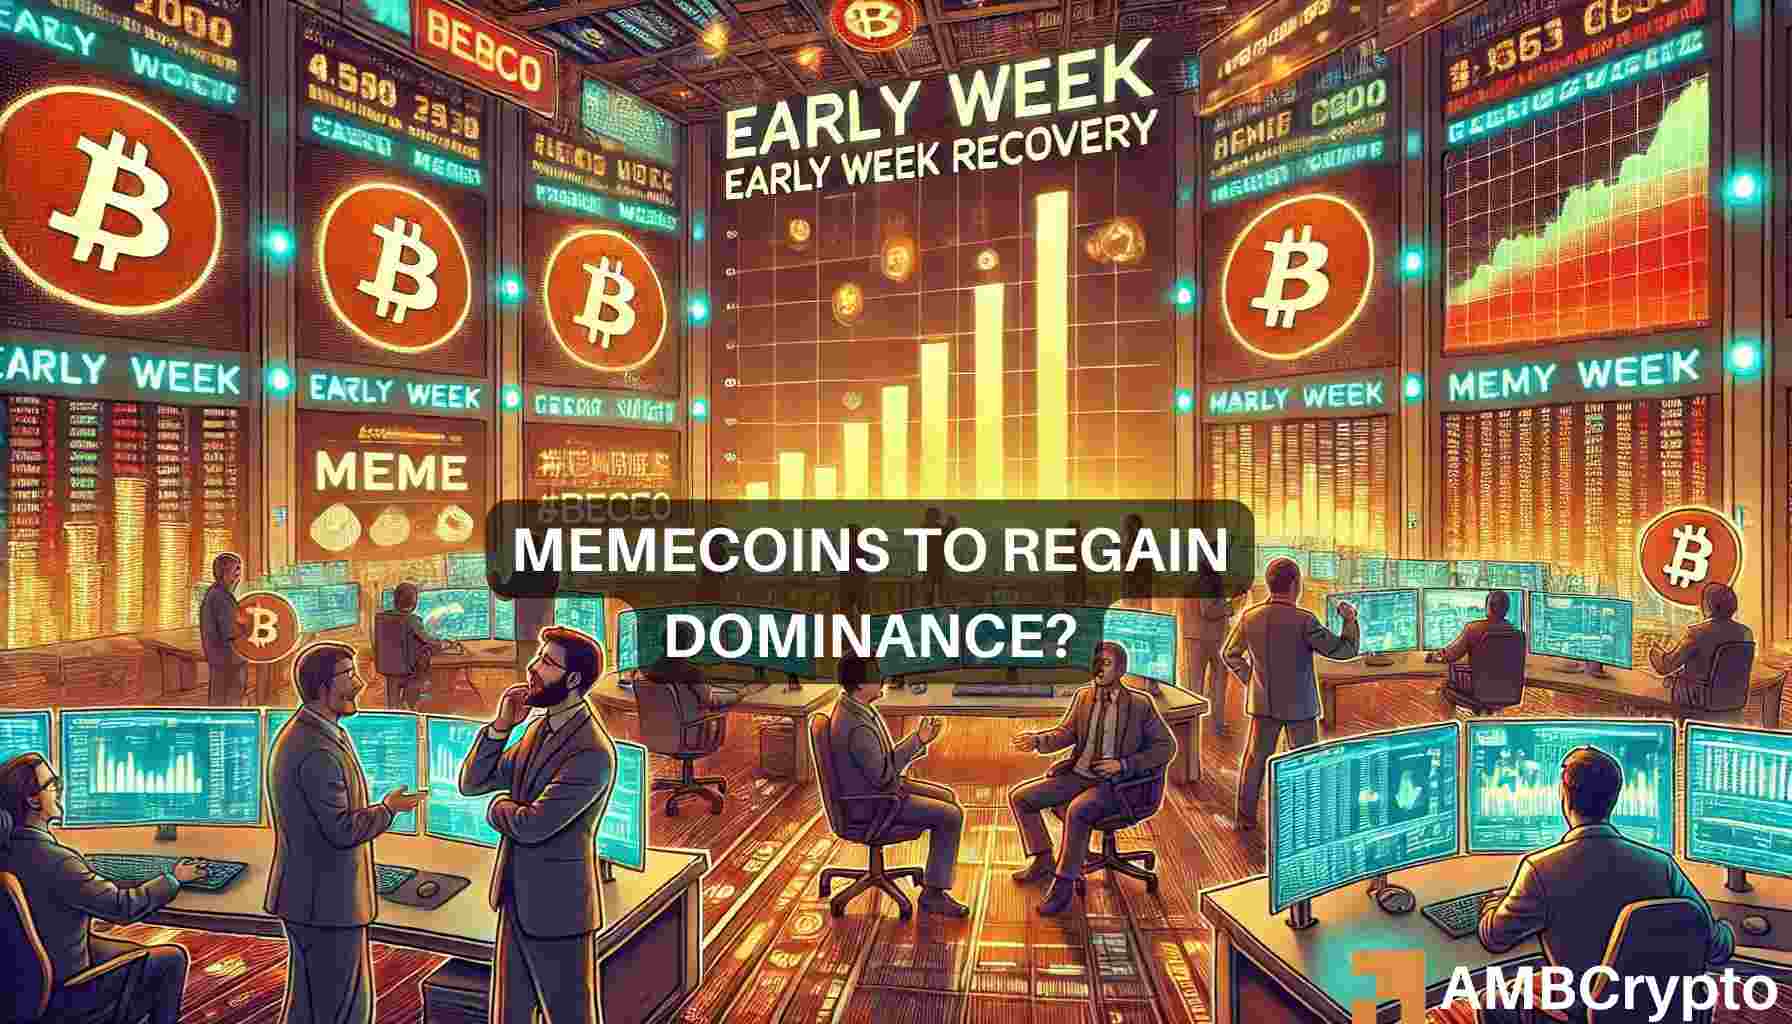 ‘Memecoins, AI will dominate’: Is the crypto market changing?